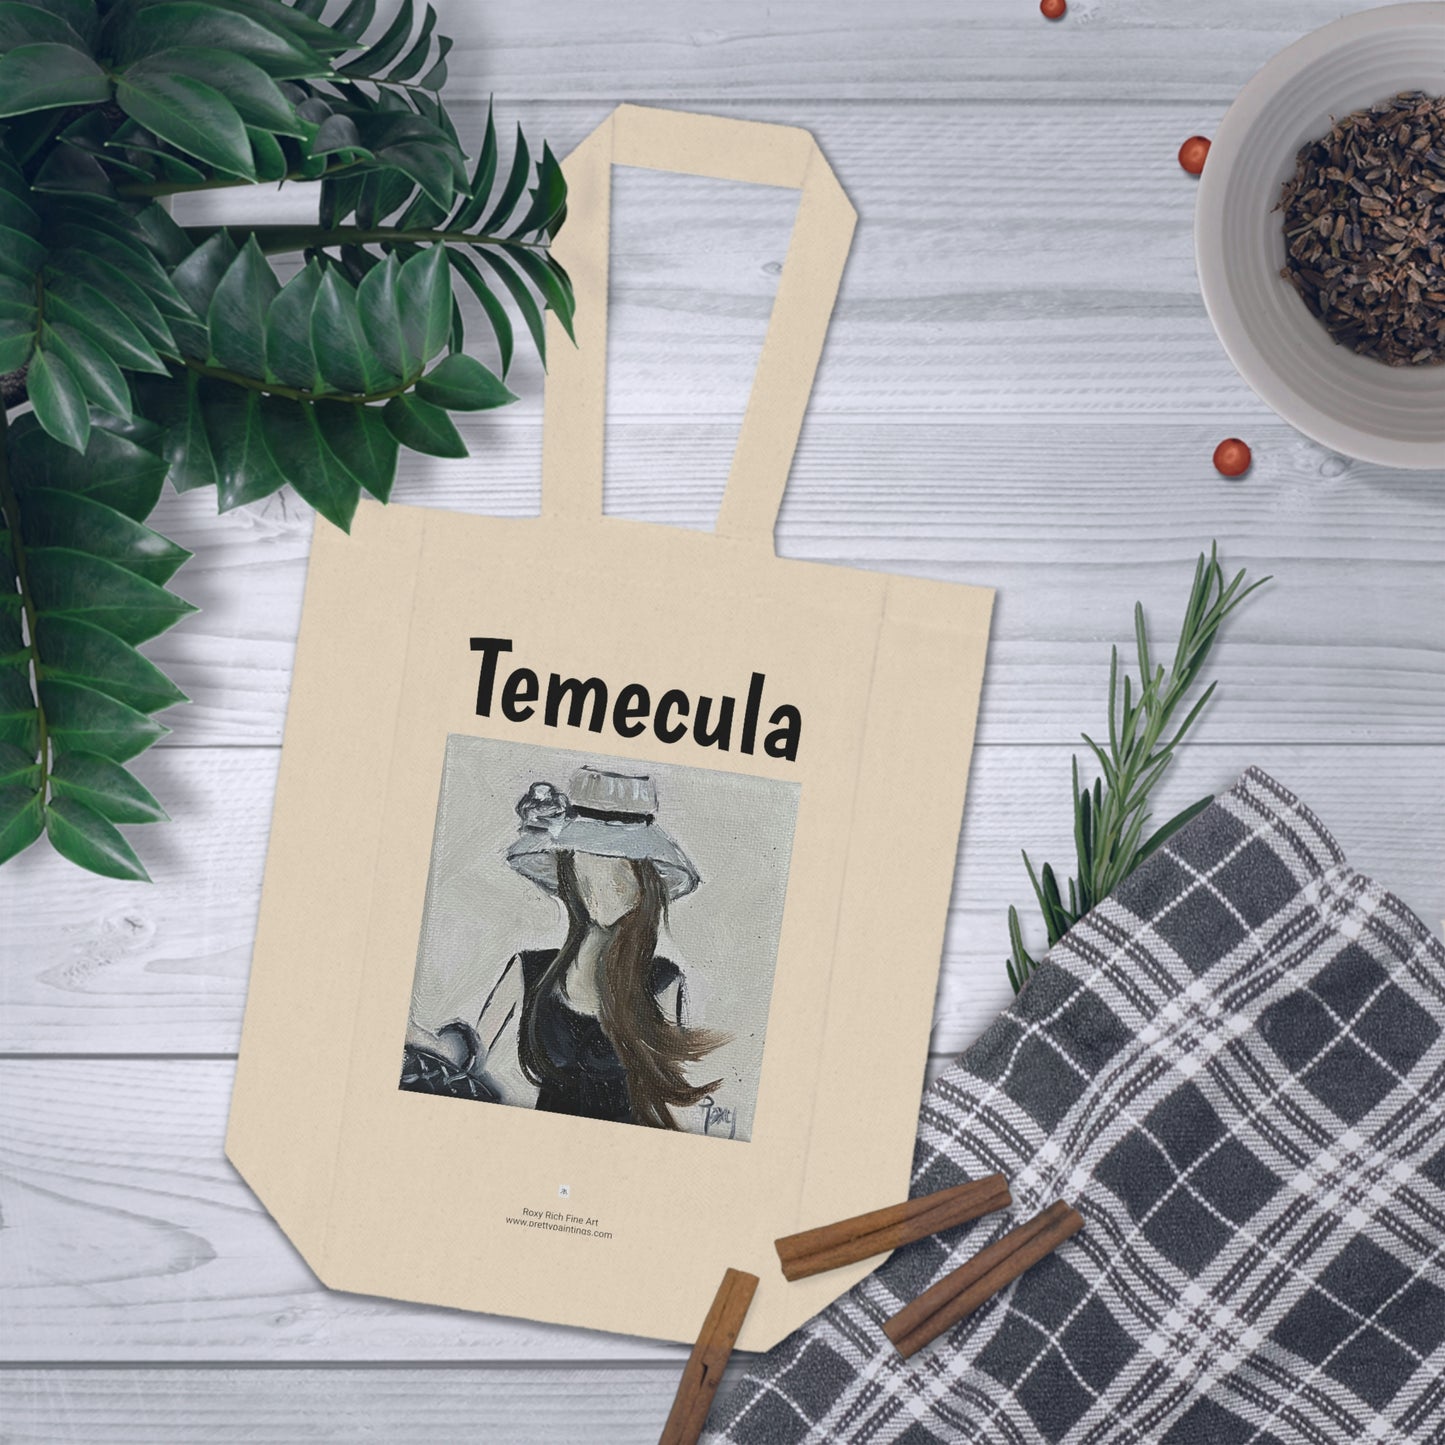 Temecula Double Wine Tote Bag featuring "Summer Glam" painting